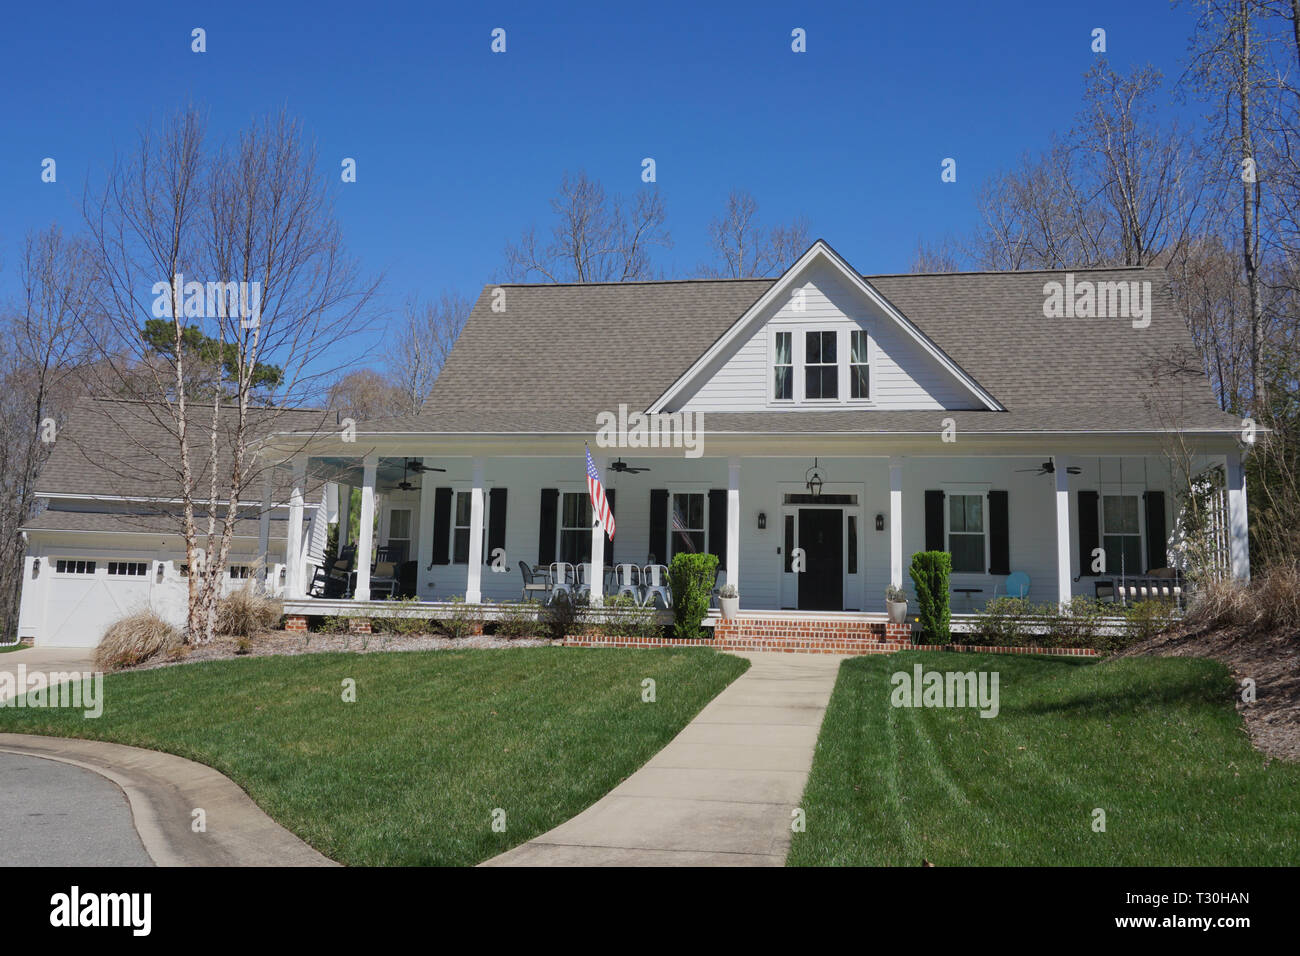 Suburban home with a large porch Stock Photo